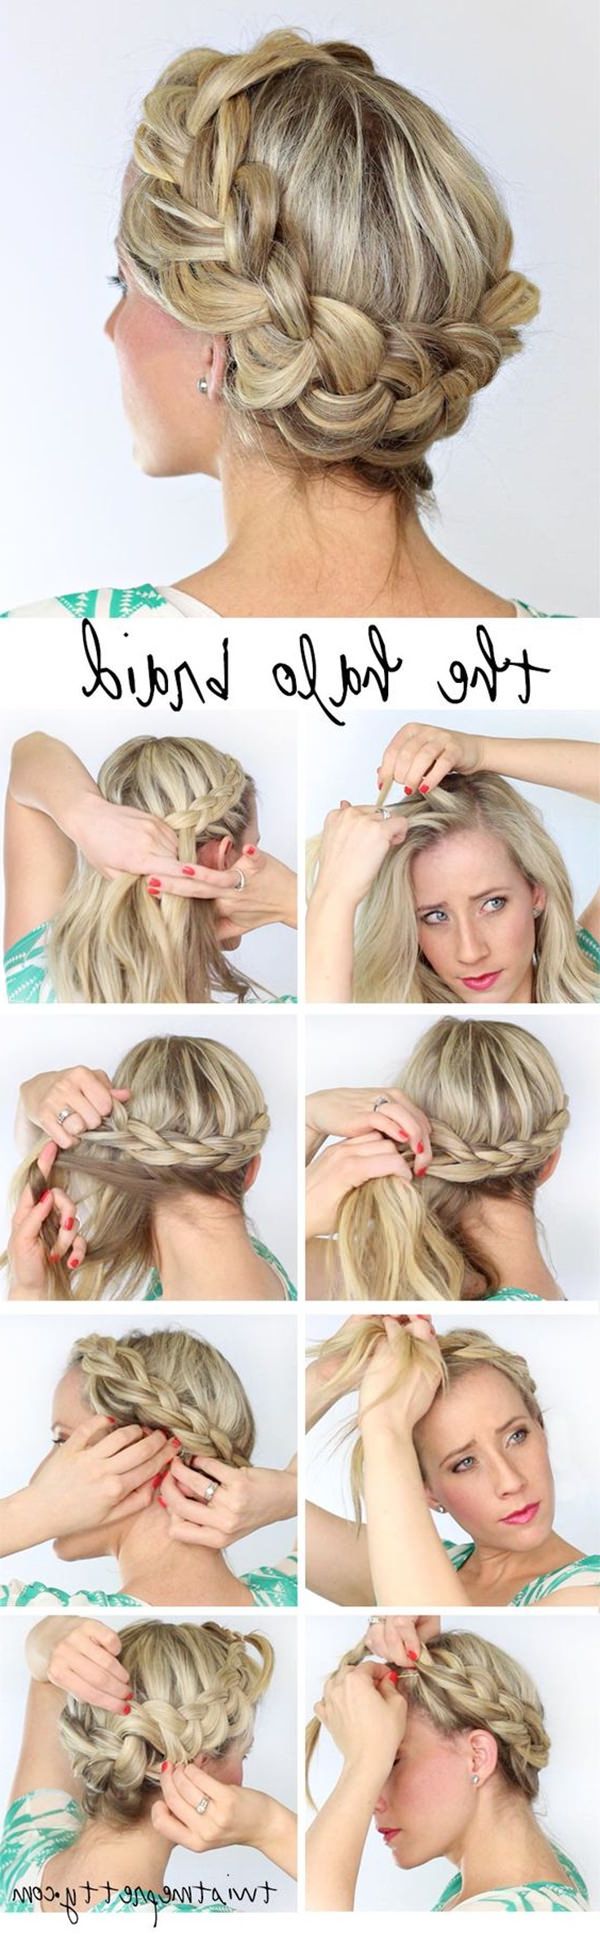 Current Updo Halo Braid Hairstyles Regarding 66 Stunning Halo Braid Ideas That You Will Love (View 18 of 20)